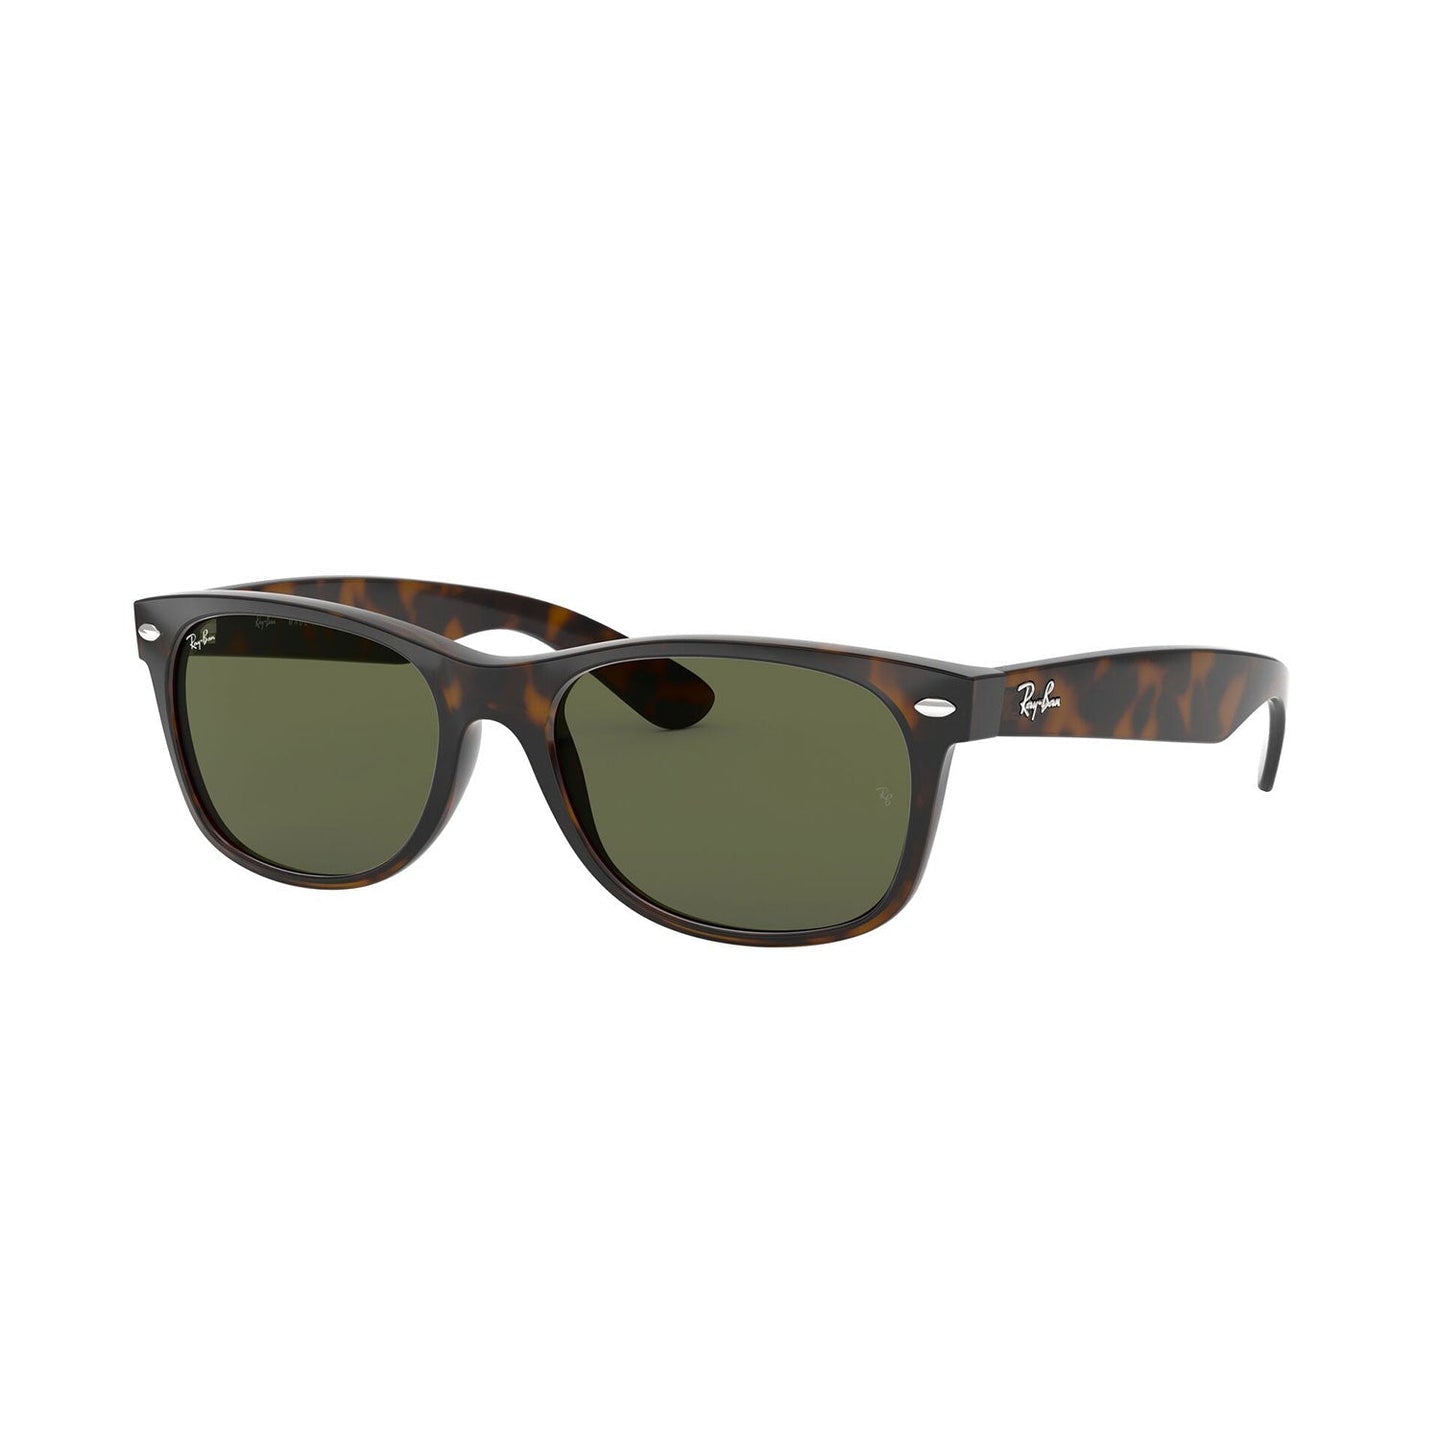 sunglasses ray ban model rb 2132 color 902l  brown tortoise